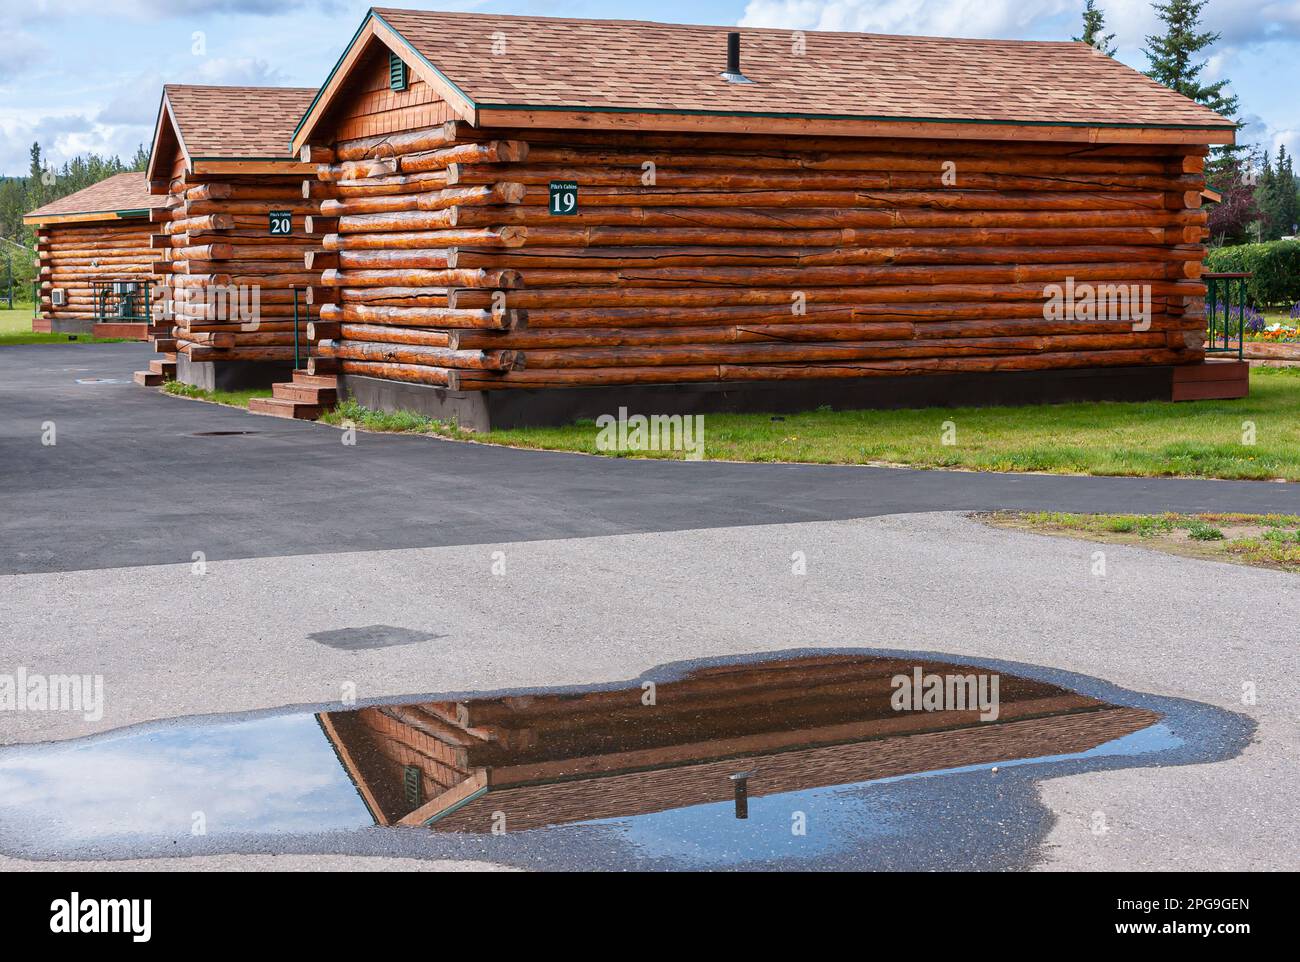 Fairbanks, Alaska, USA - July 27, 2011: Pikes Waterfront Lodge offers brown wooden small dwellings behind asphalt driveway and on green lawn. Rain poo Stock Photo